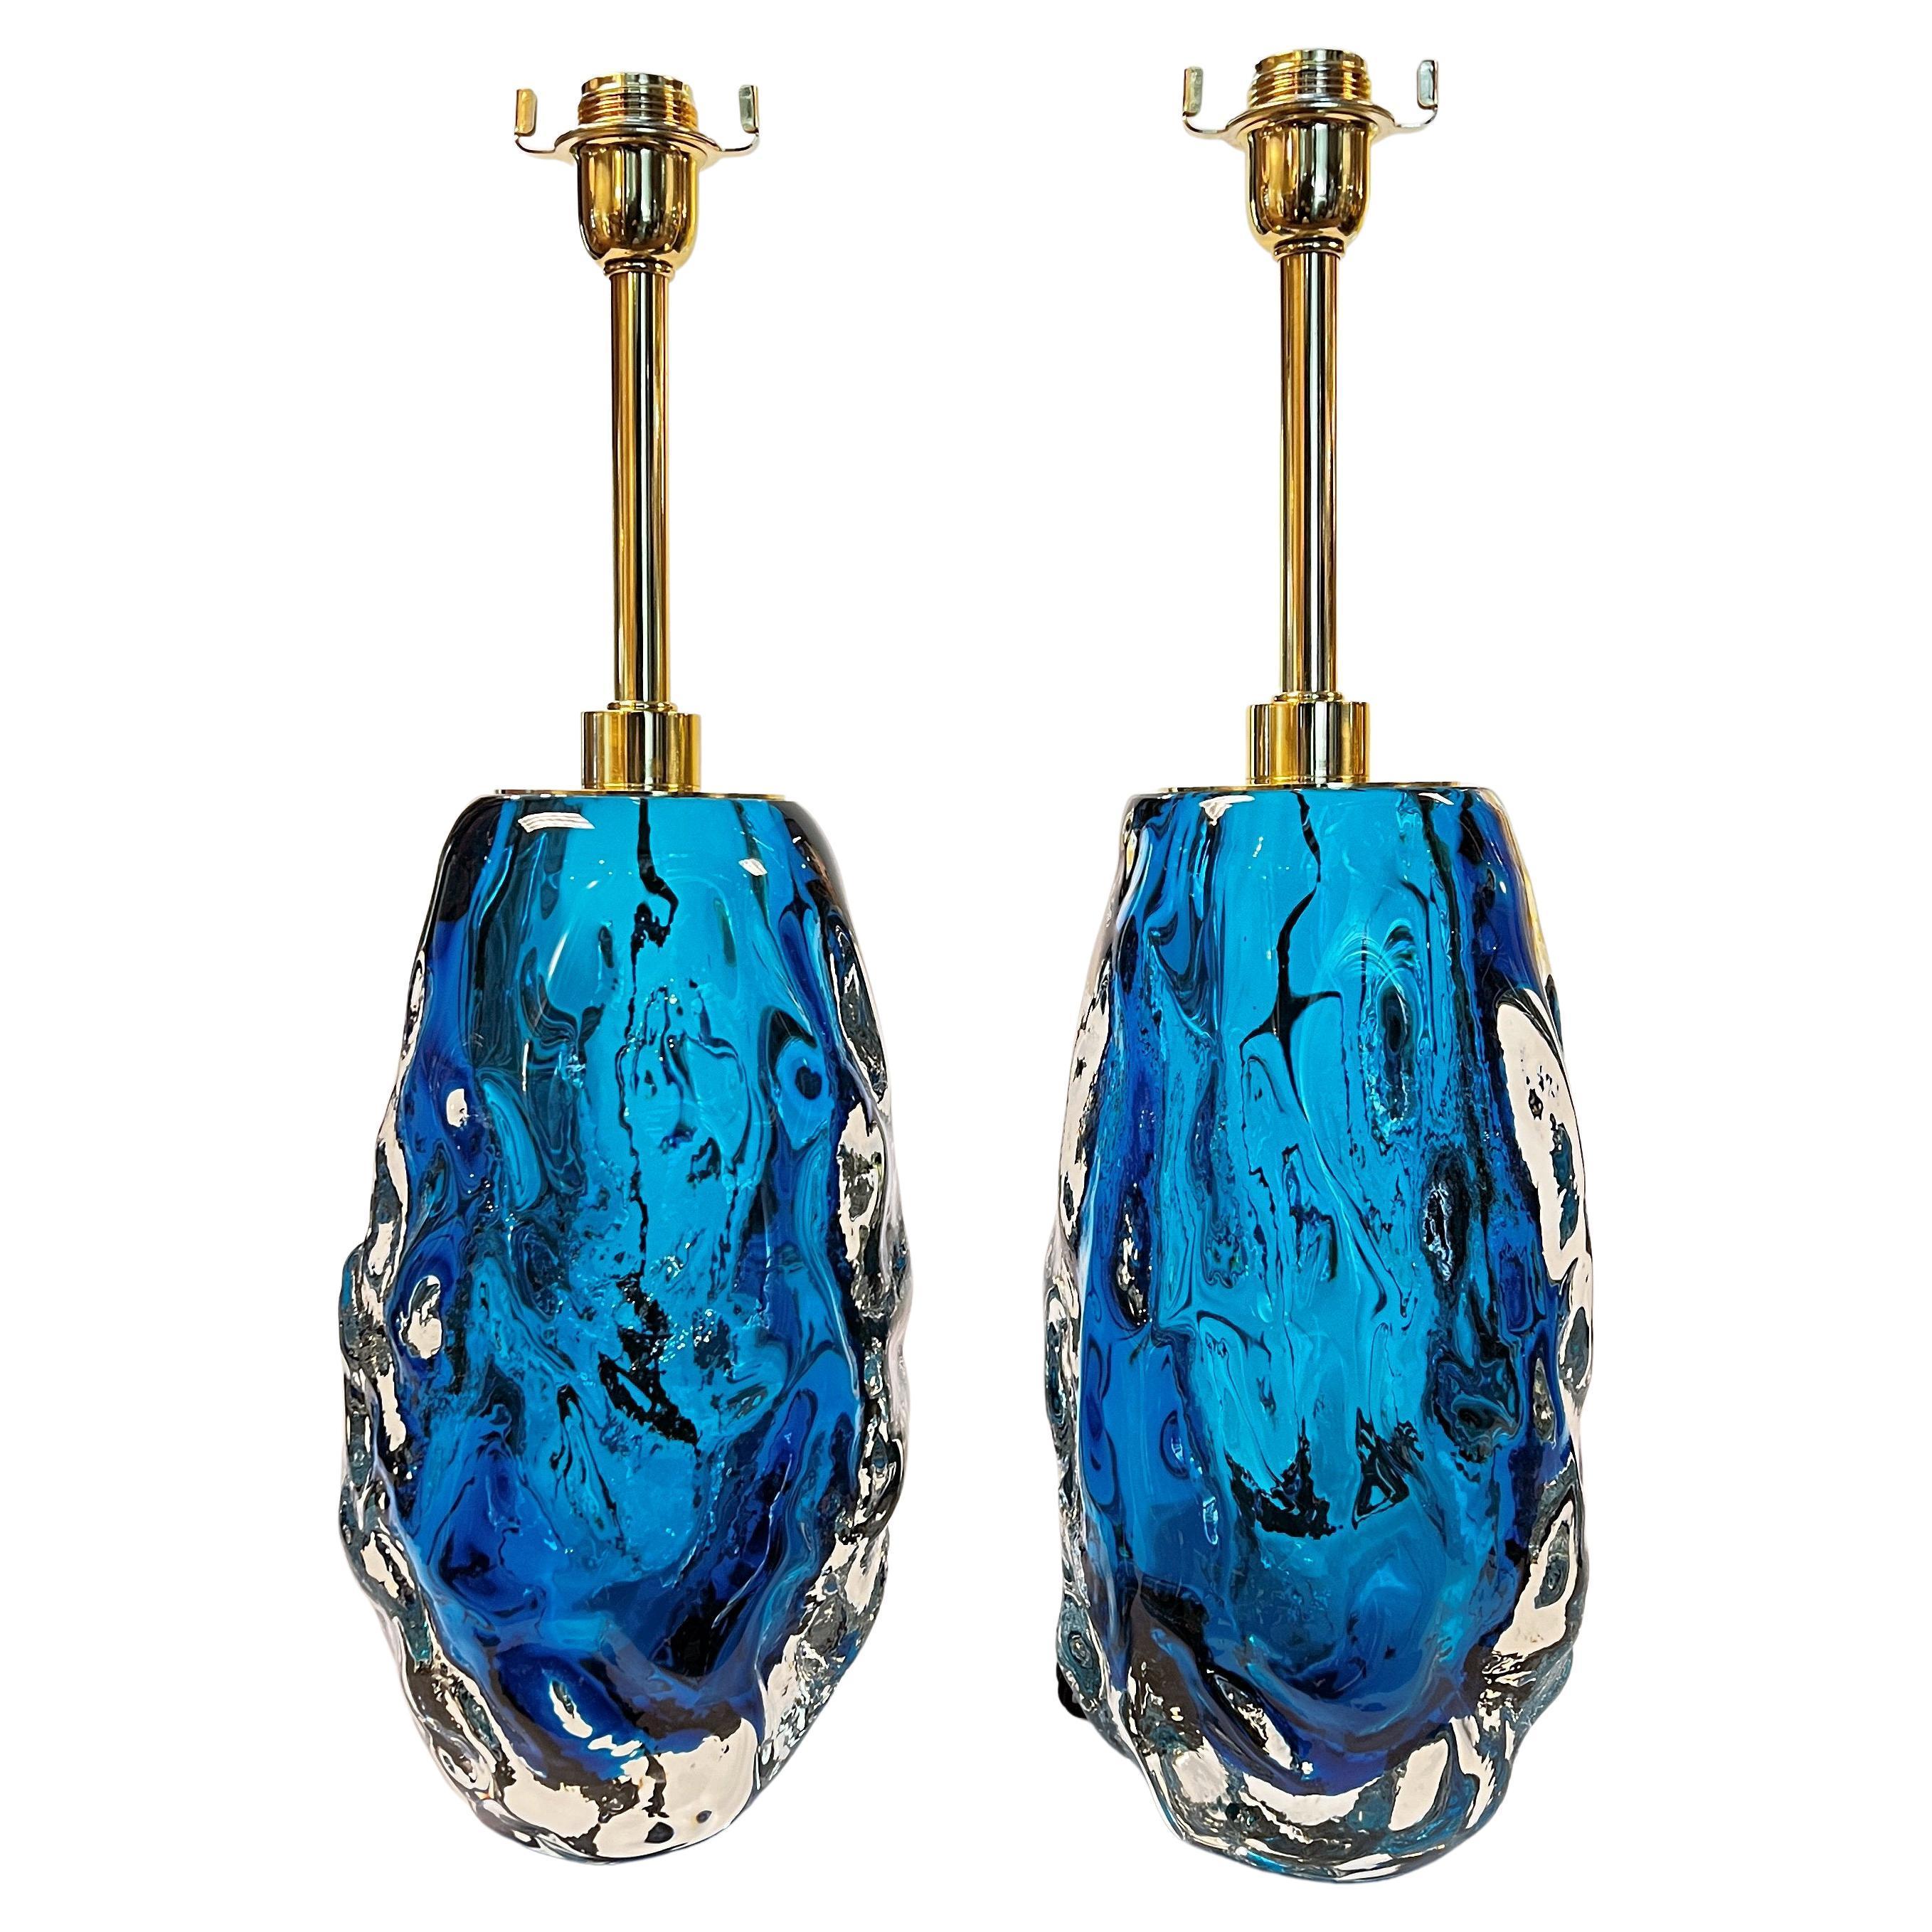 Our pair of table lamps by Alberto Dona (Italian, 1944- ) are crafted from brilliant shimmering blue and clear glass in undulating ovoid shape with polished, lacquered brass hardware. With American sockets and wiring. 23.5 in tall and the glass